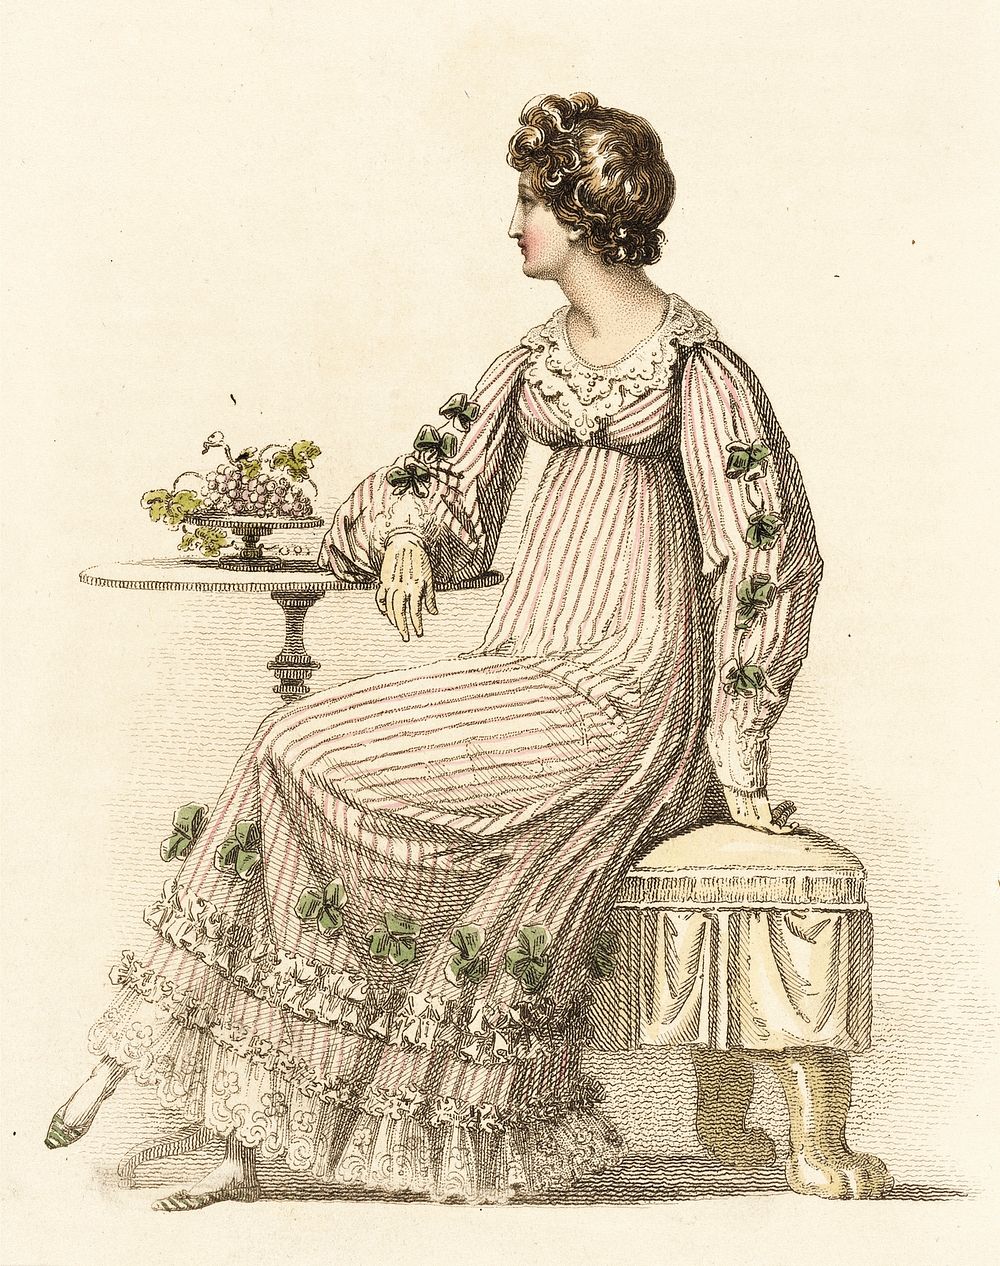 Fashion Plate, 'Half Dress' for 'The Repository of Arts' by Rudolph Ackermann